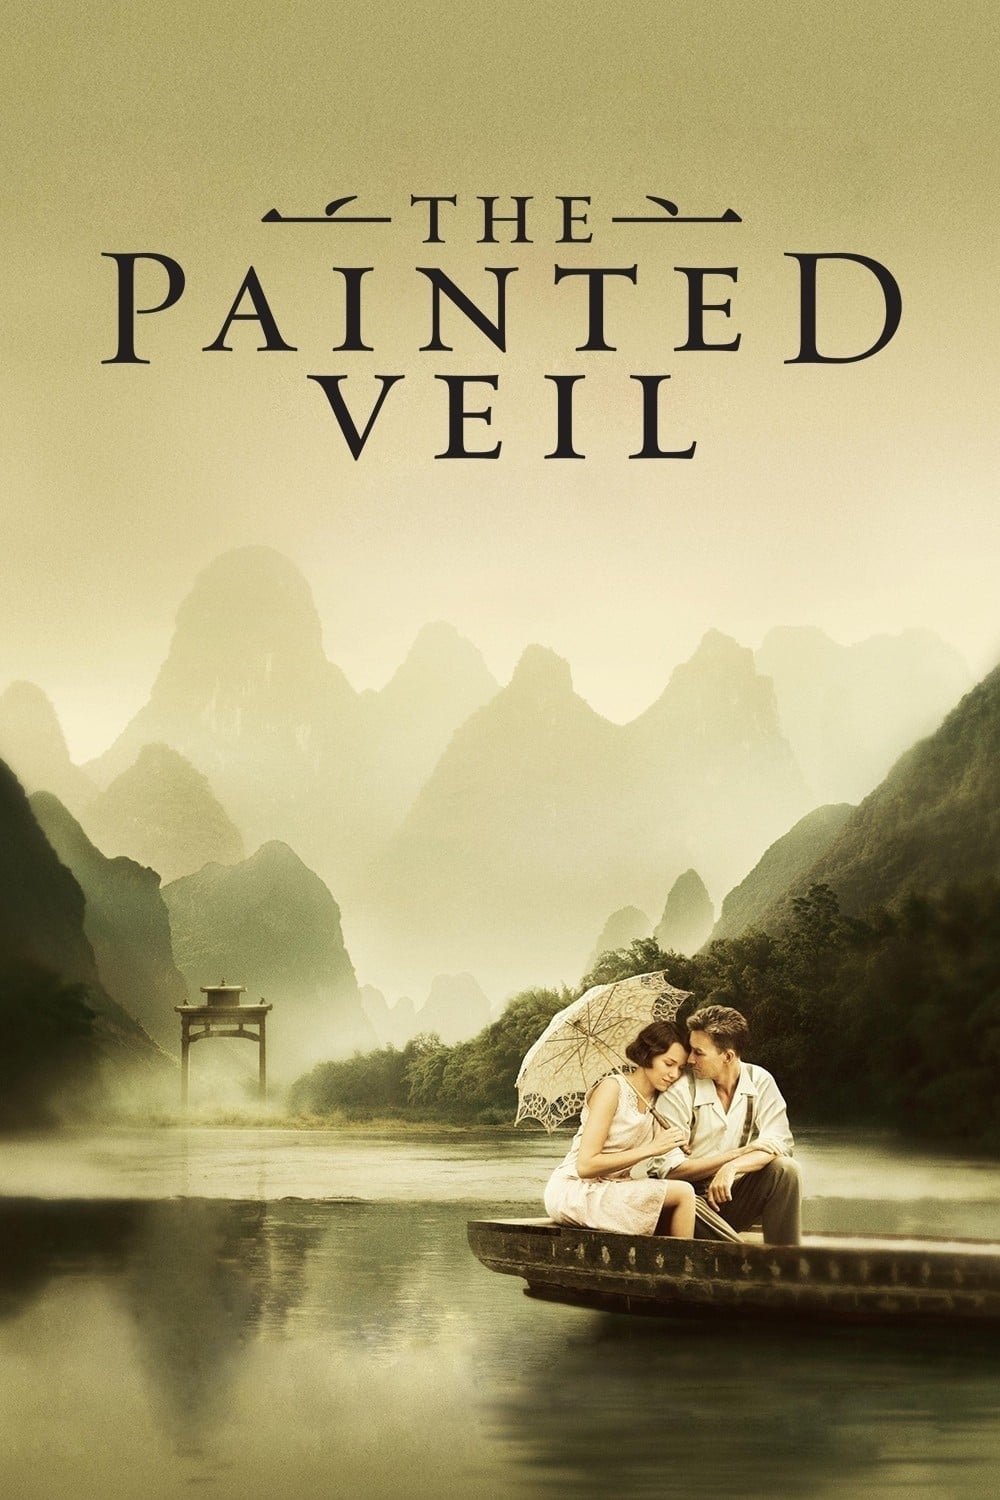 The Painted Veil (2006) Picture